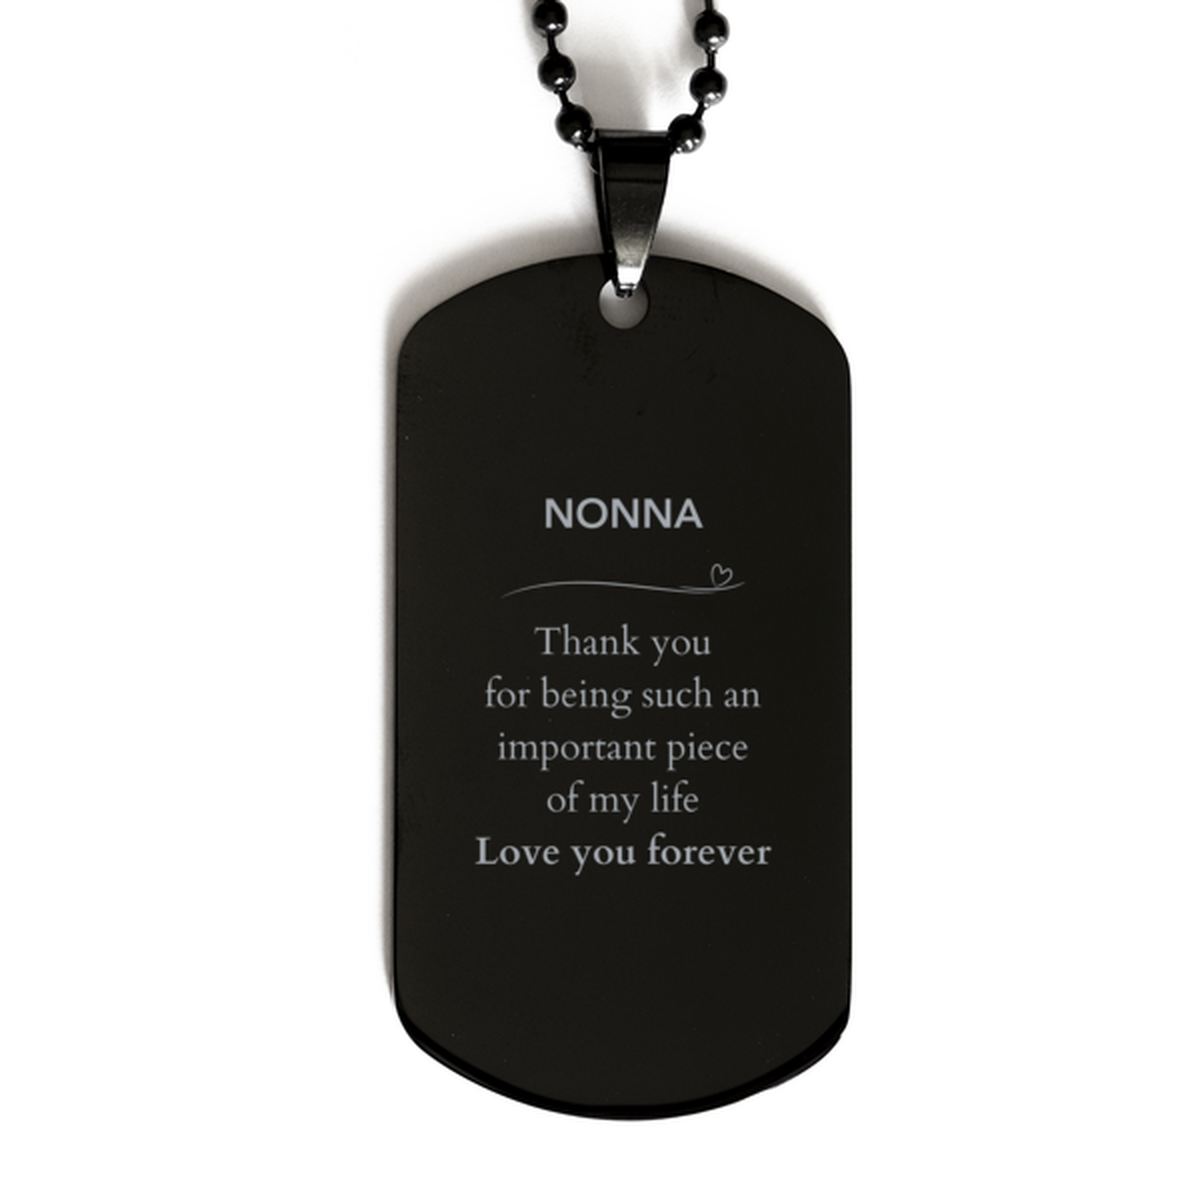 Appropriate Nonna Black Dog Tag Epic Birthday Gifts for Nonna Thank you for being such an important piece of my life Nonna Christmas Mothers Fathers Day